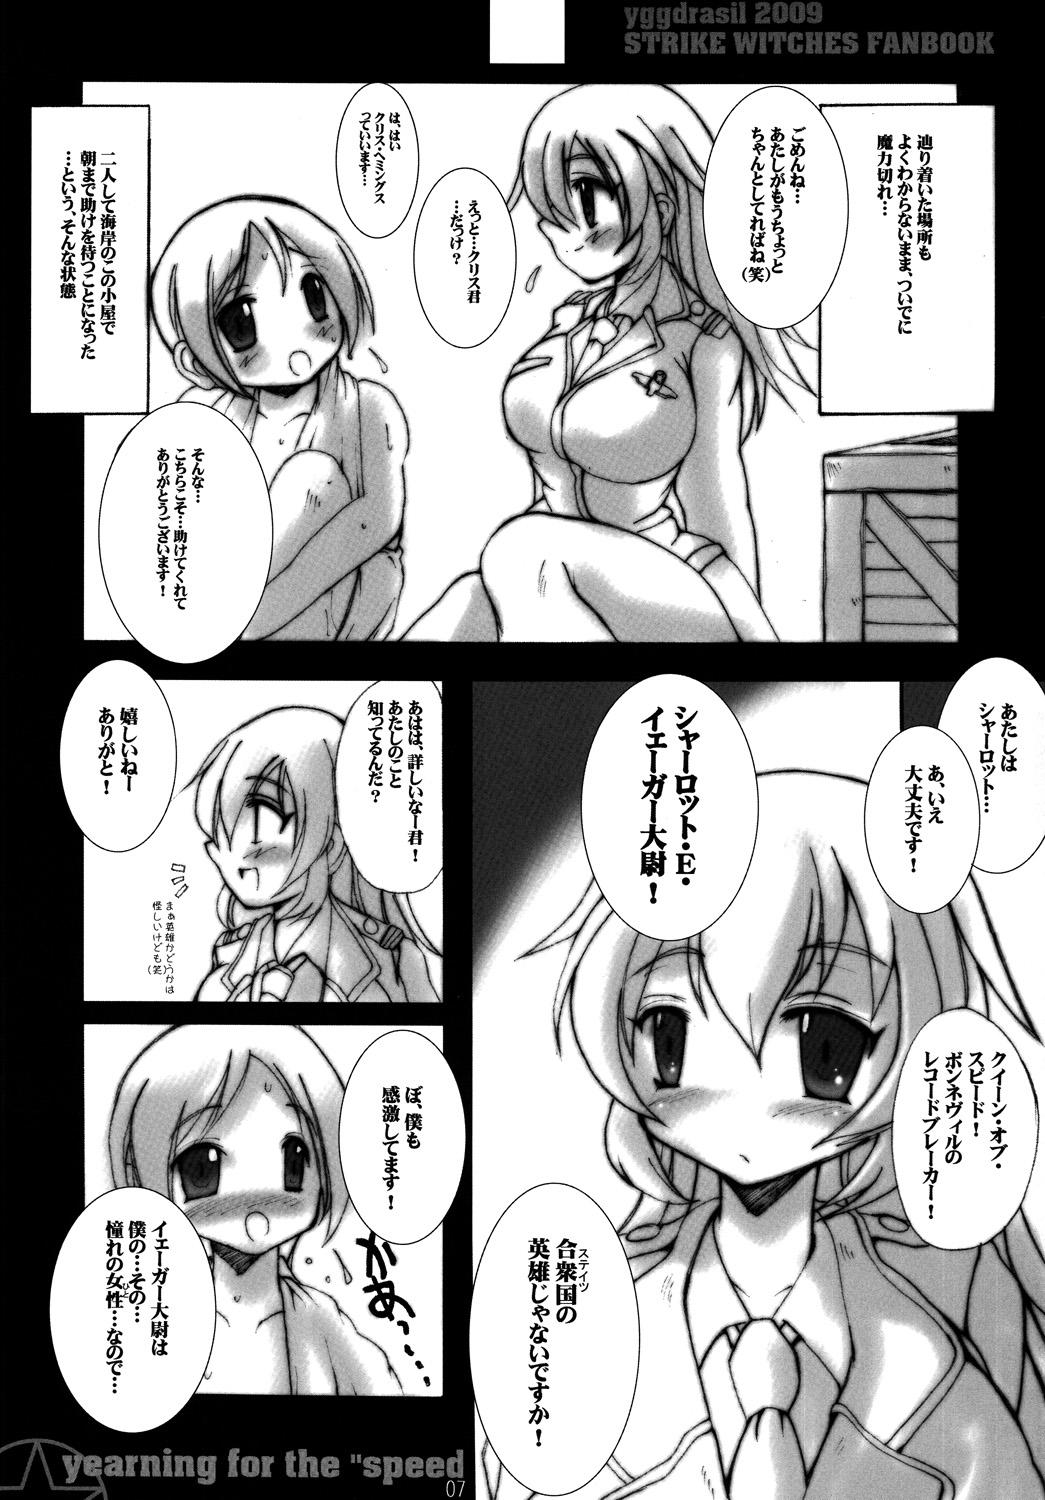 Rebolando yearning for the “speed” - Strike witches  - Page 6